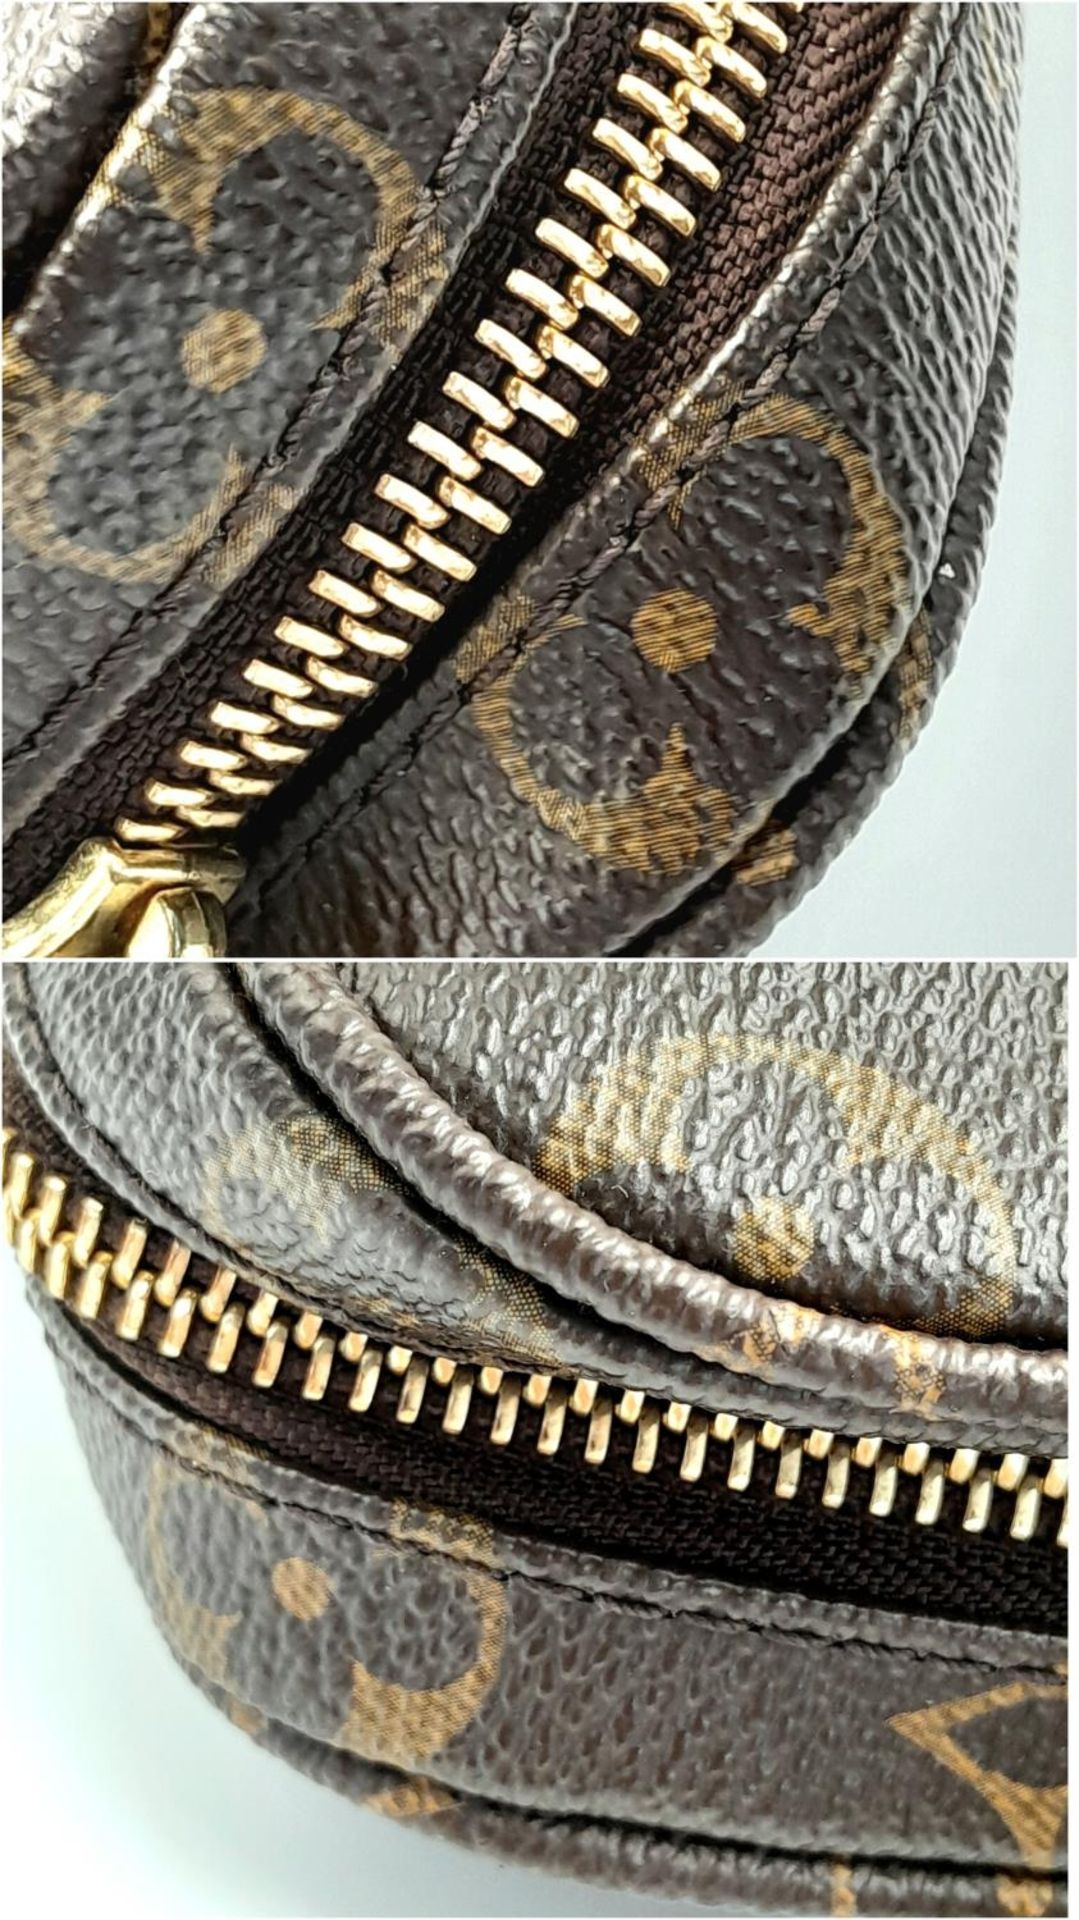 A Louis Vuitton Trotteur Beaubourg Satchel Bag. Monogramed canvas exterior with gold-toned hardware, - Image 6 of 9